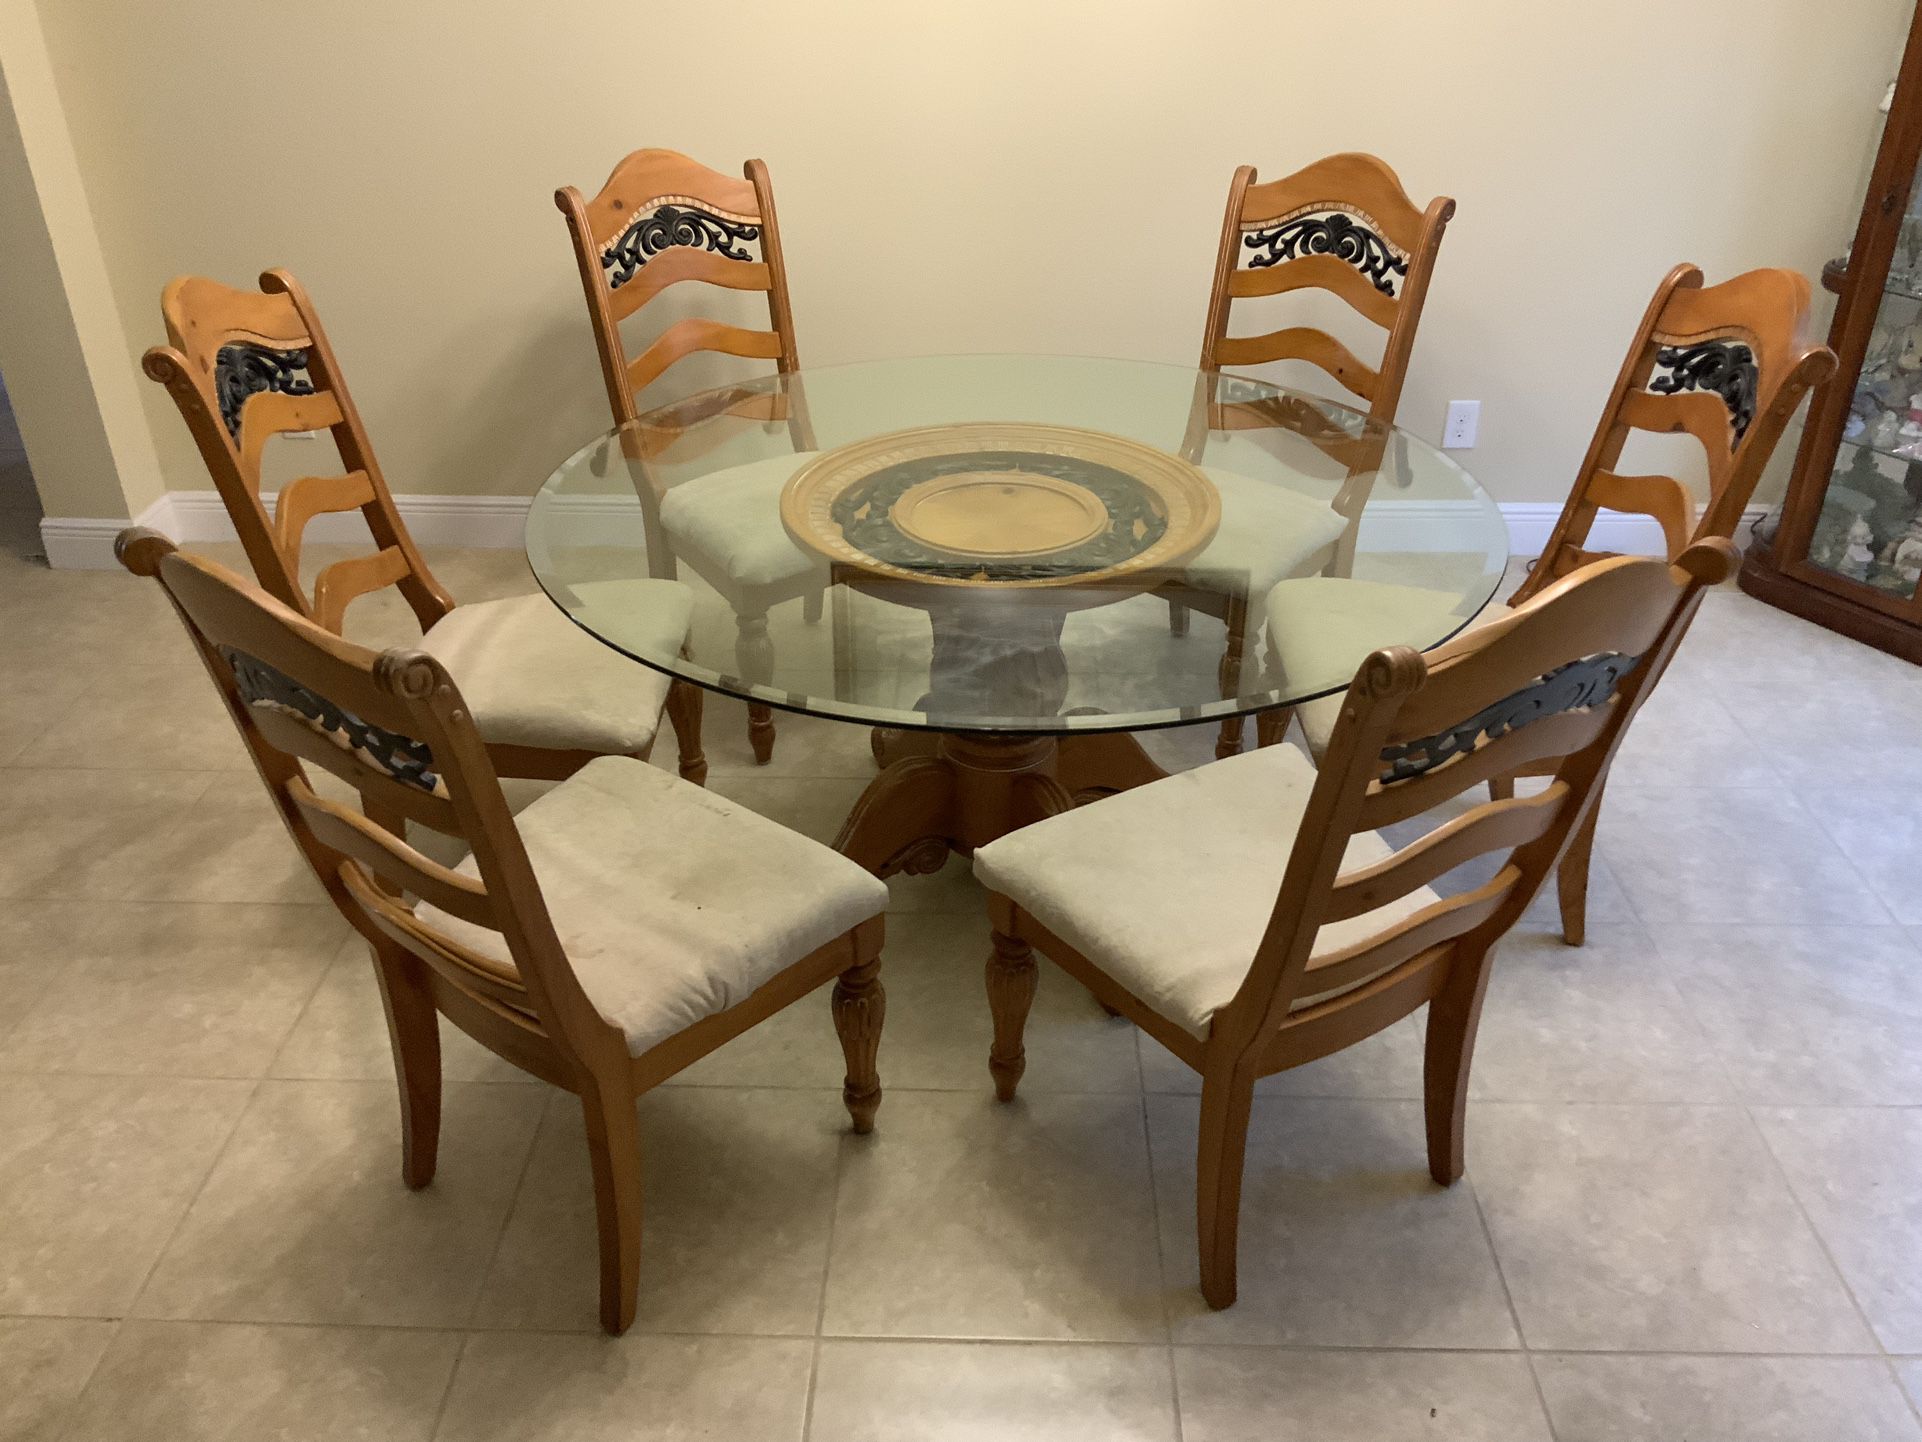 Round Glass Table and 6 Chairs